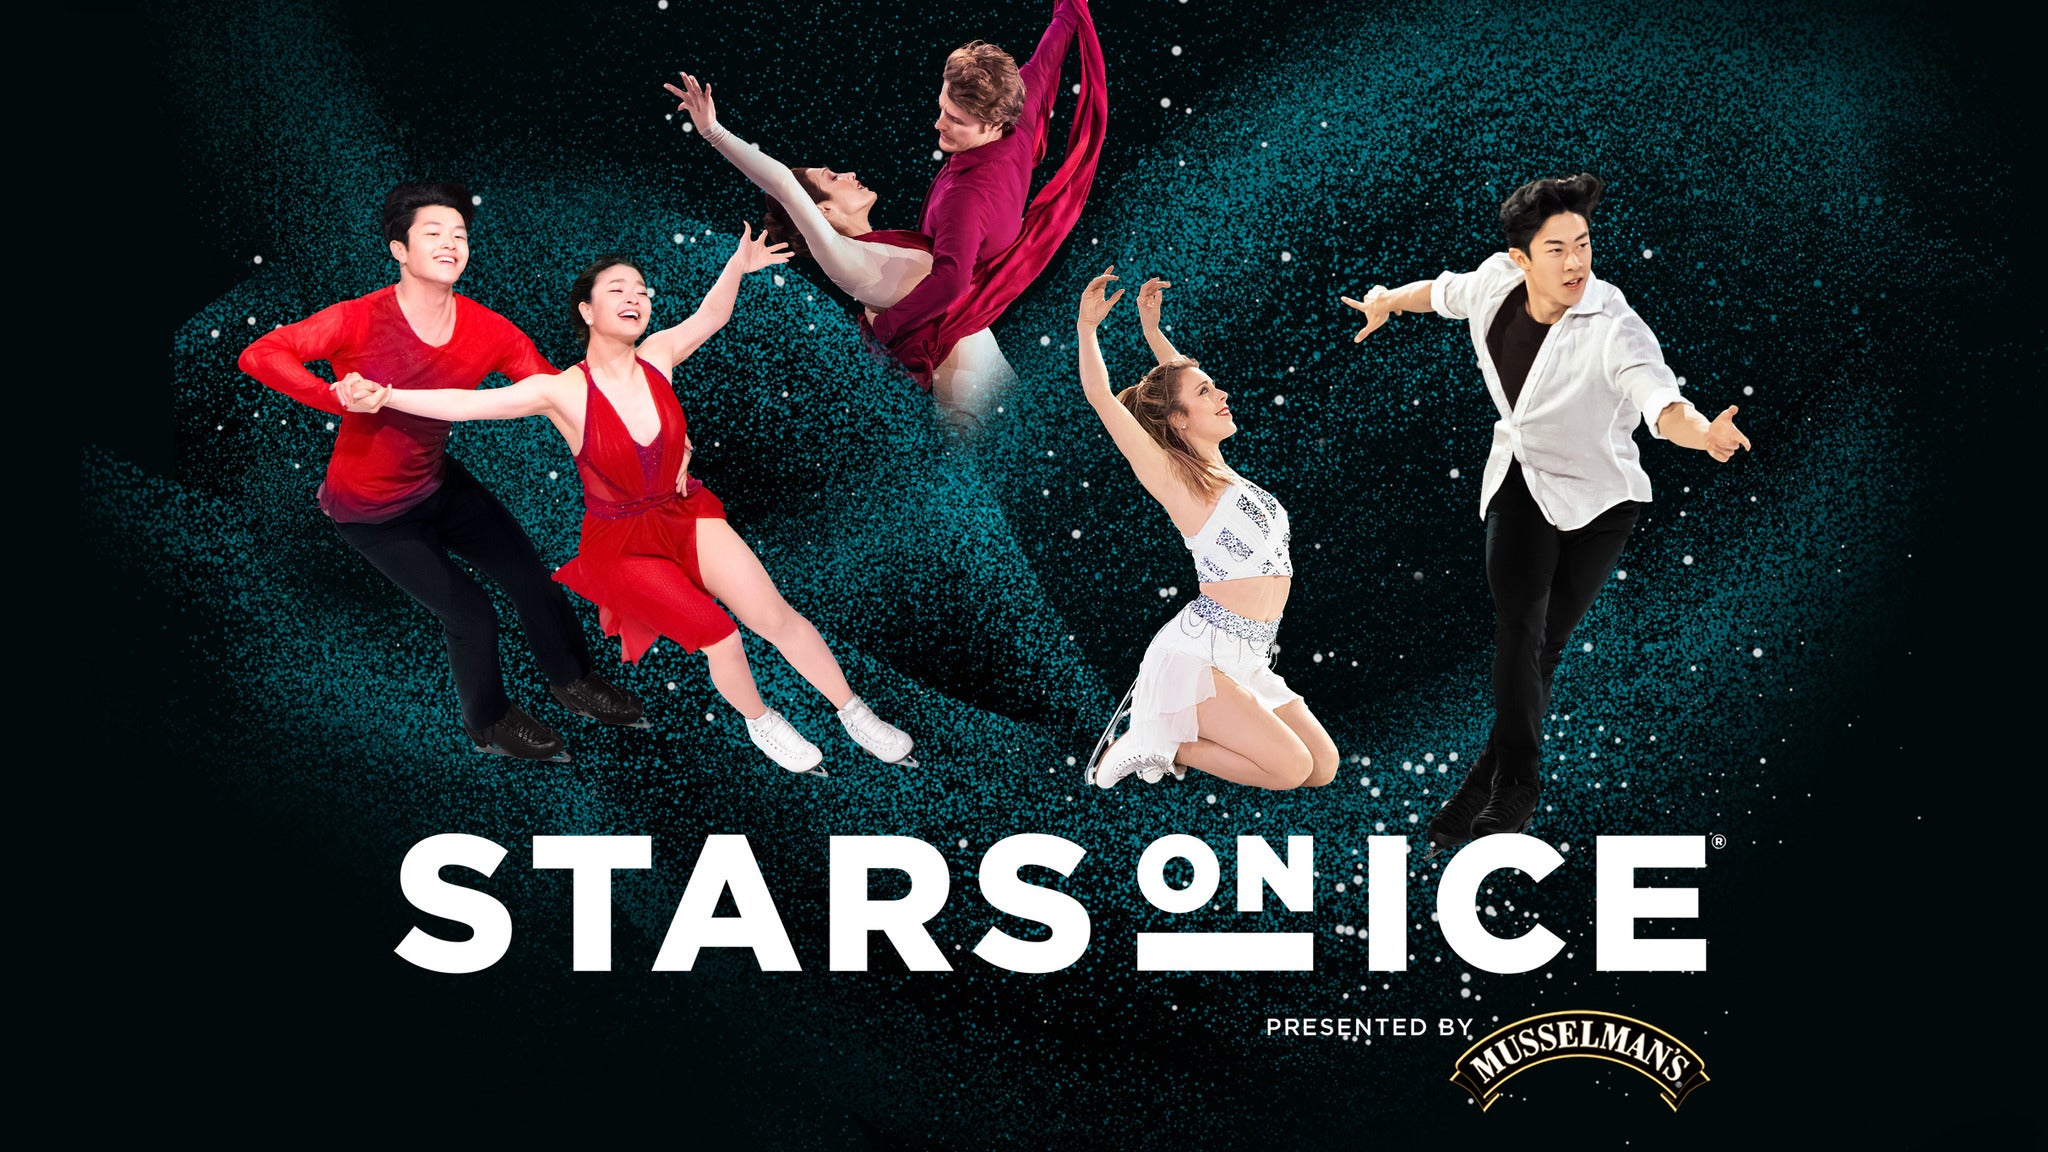 Stars on Ice presented by Musselman's Tickets Event Dates & Schedule